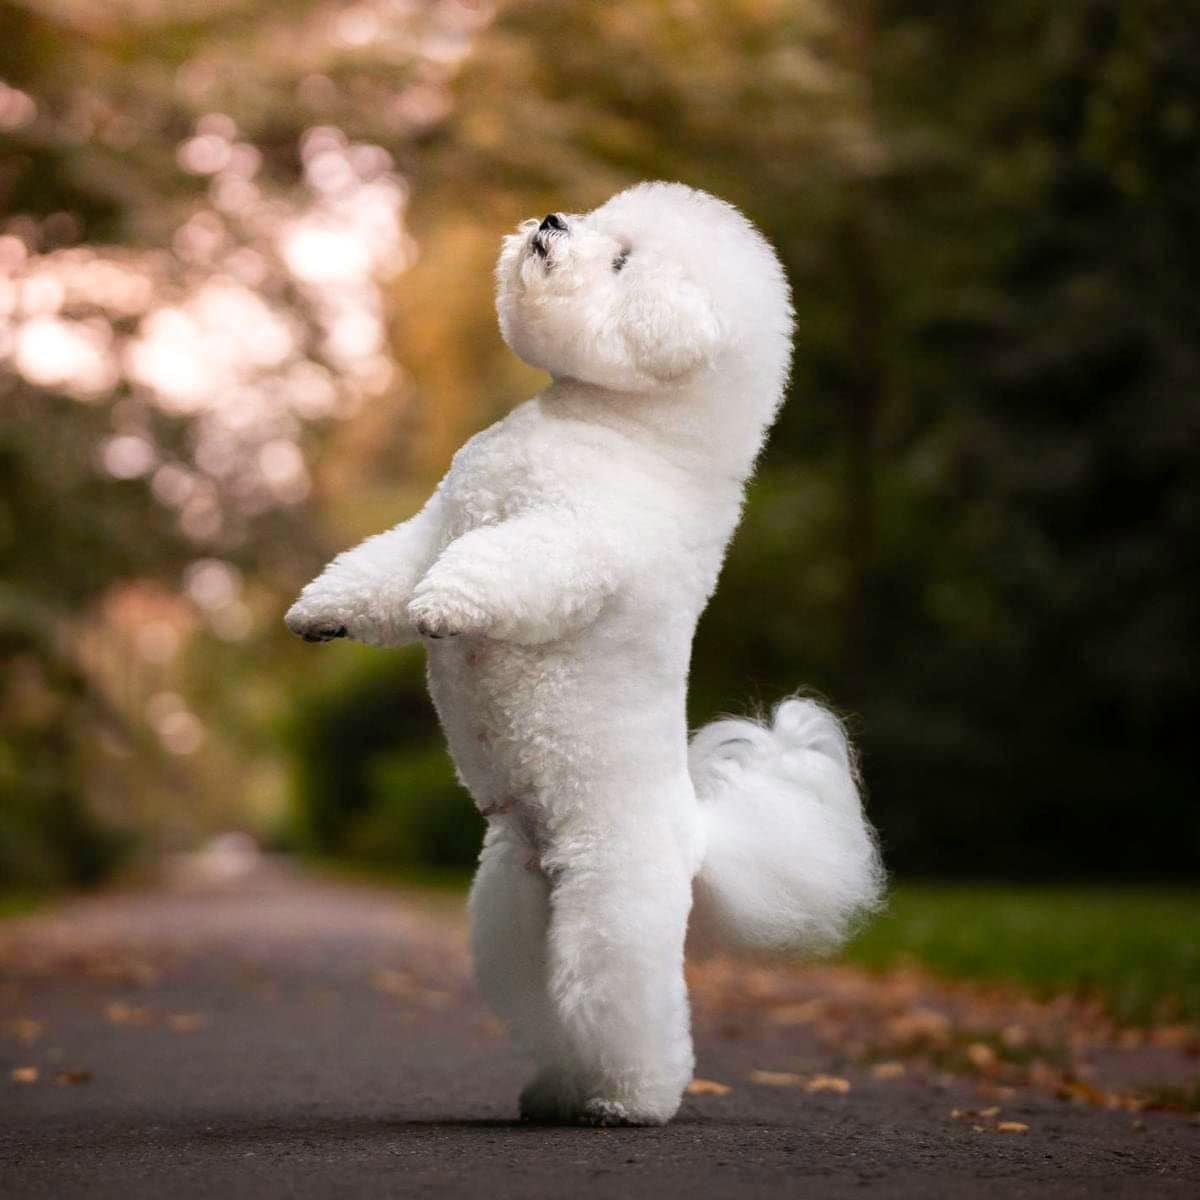 A bichon frise dog is standing in a park alley. The dog is dancing on its hind legs. Outdoor photo